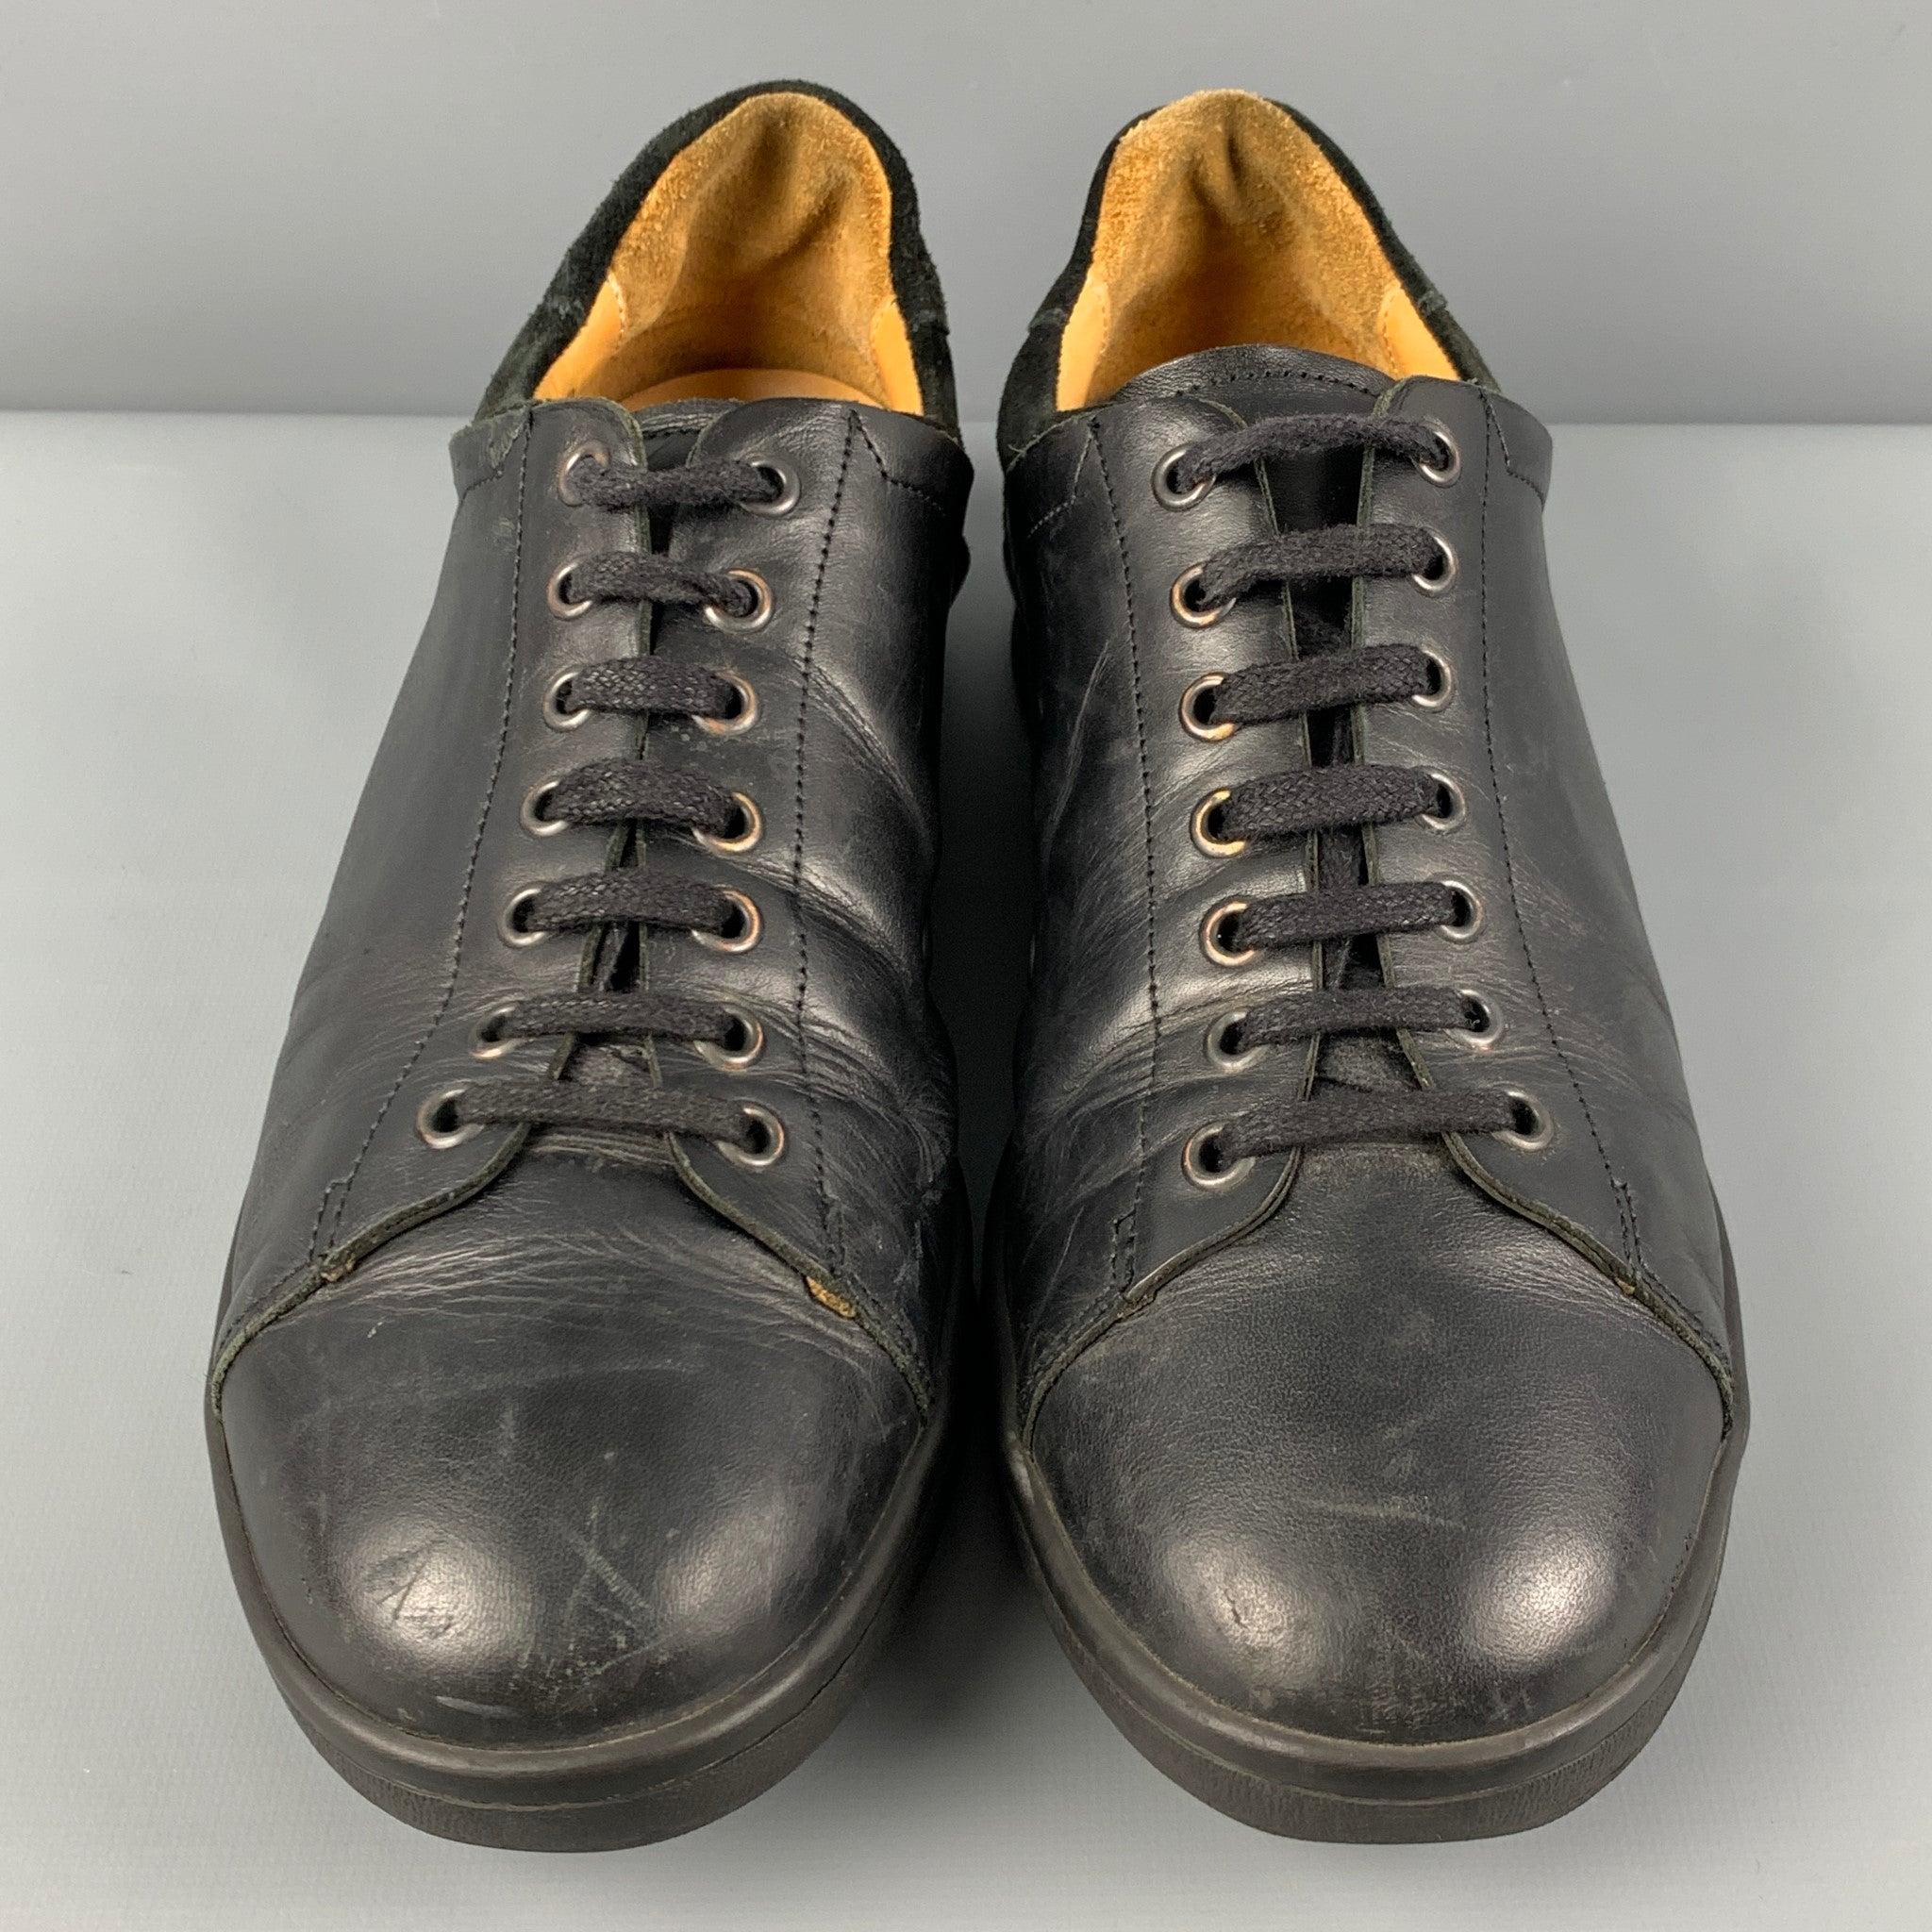 Men's DAMIR DOMA Size 10 Black Leather Sneakers For Sale